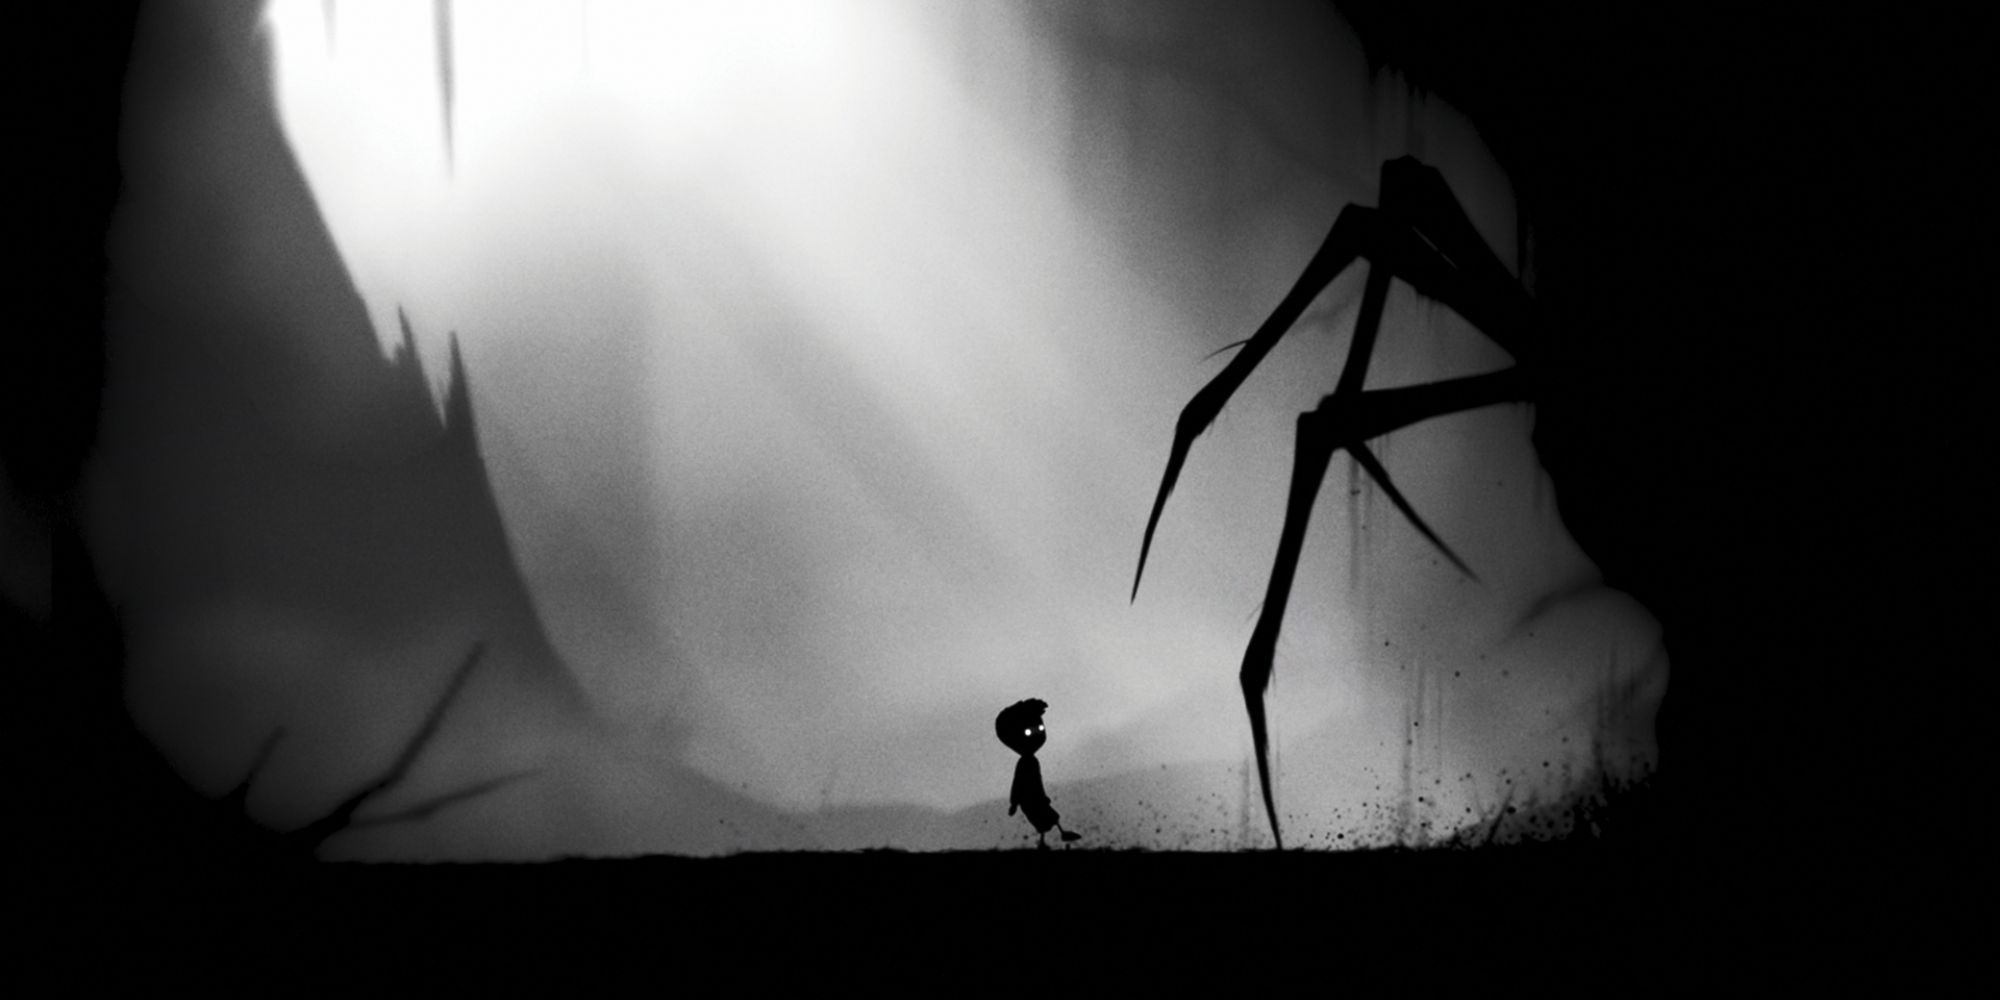 The silhouette of a boy looks up to towering spider legs in Limbo